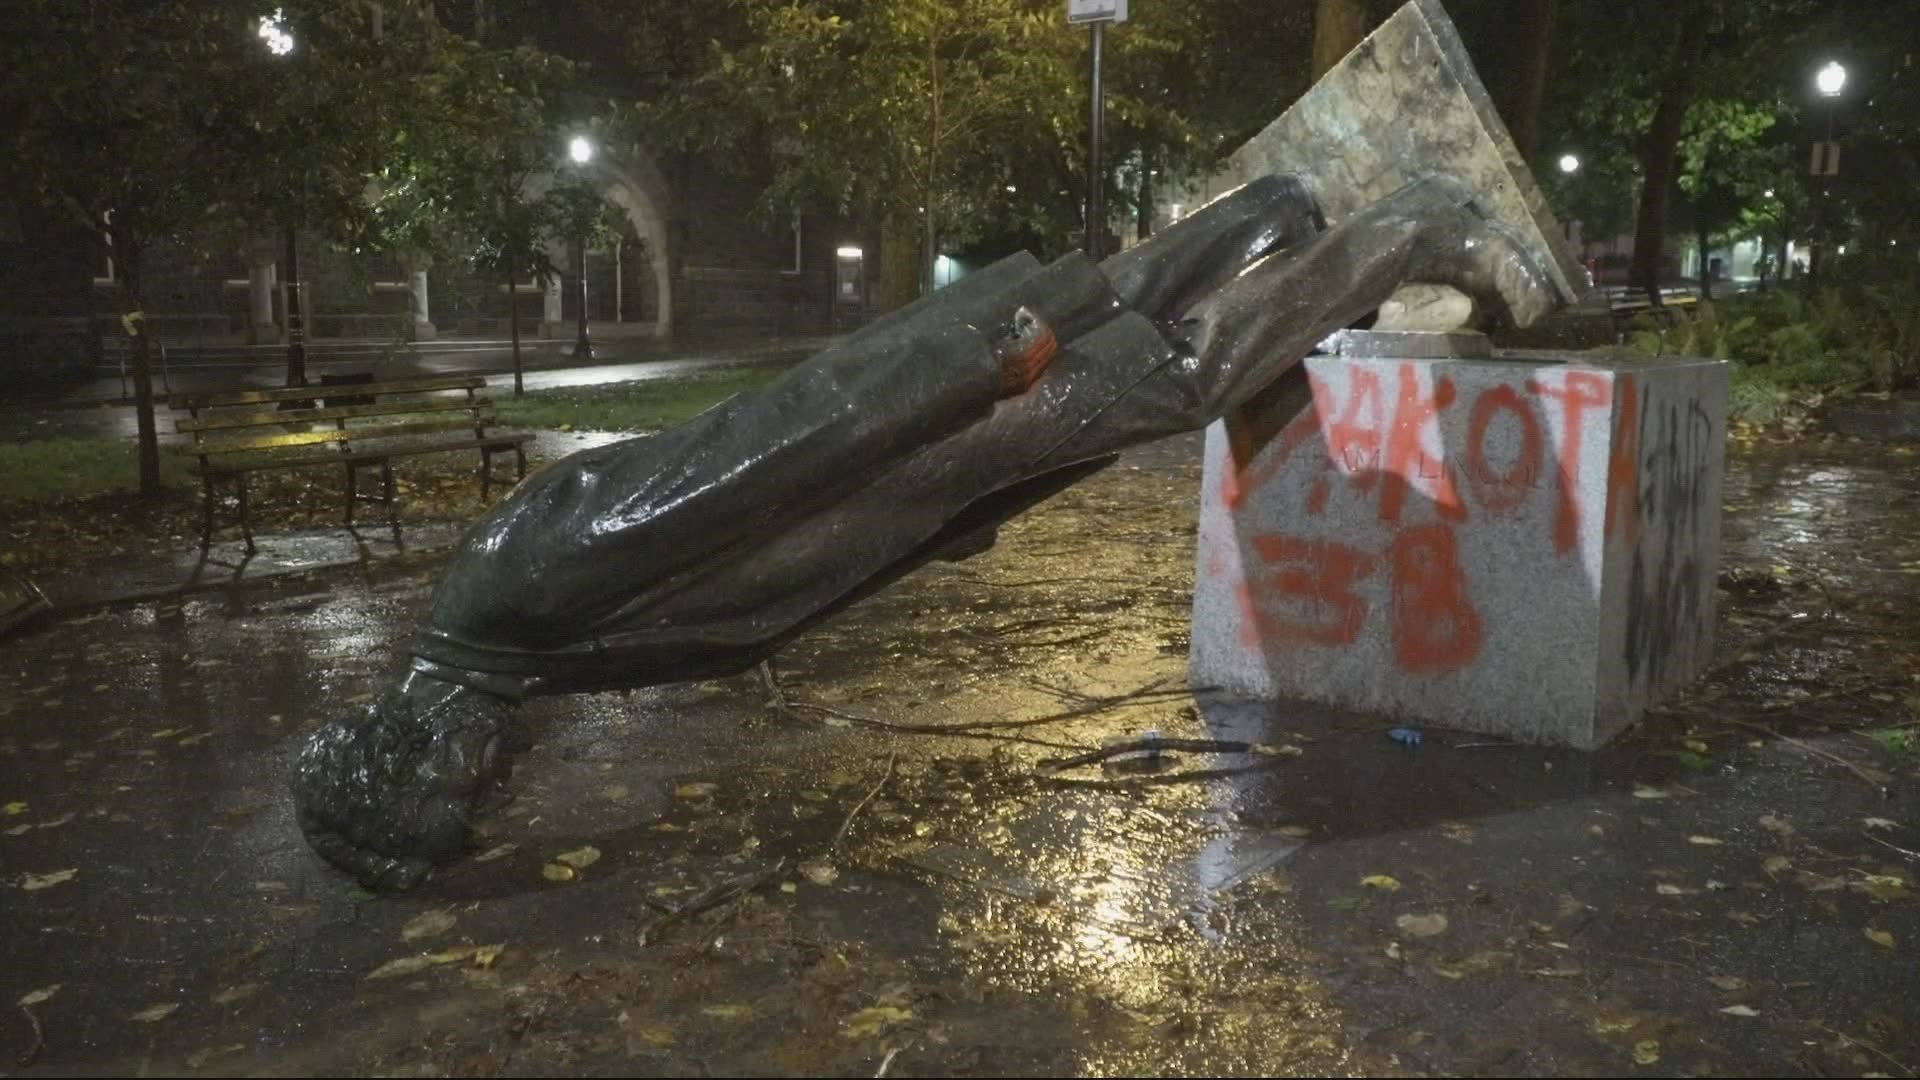 Several statues that were toppled and removed during last year's protests in Portland likely won't be returning to the sites where they once stood.